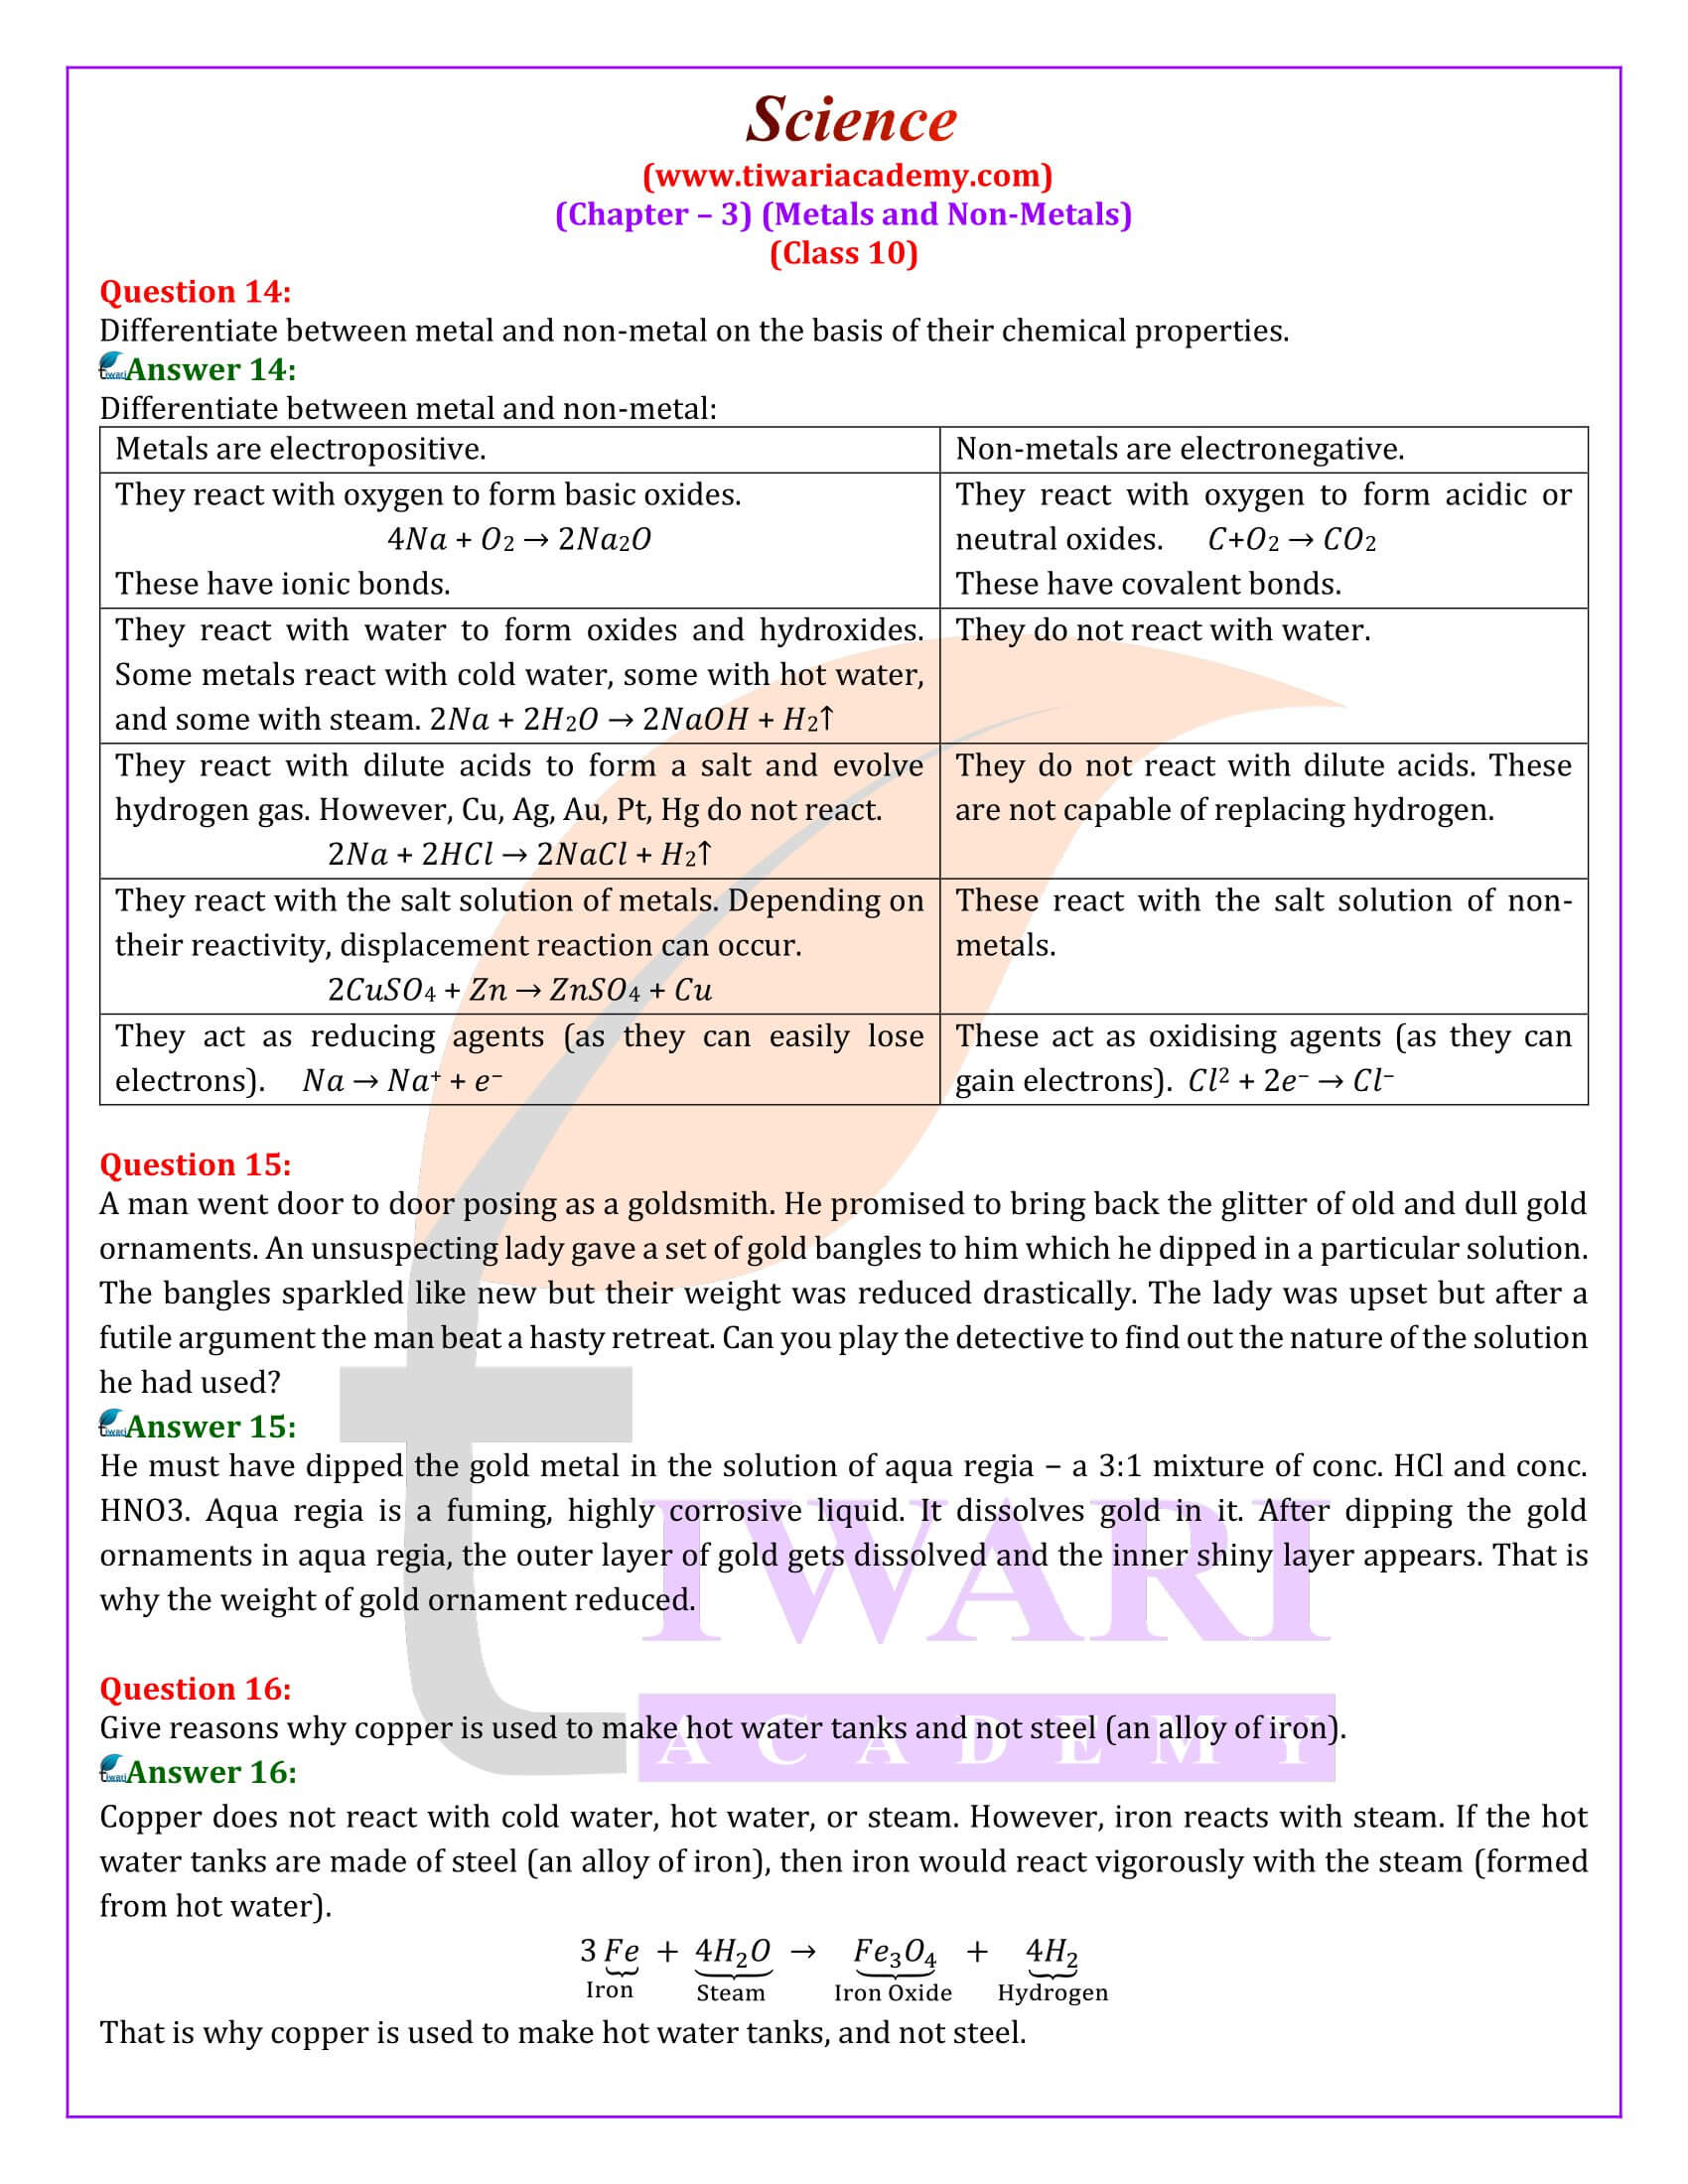 NCERT Solutions for Class 10 Science Chapter 3 Question Answers